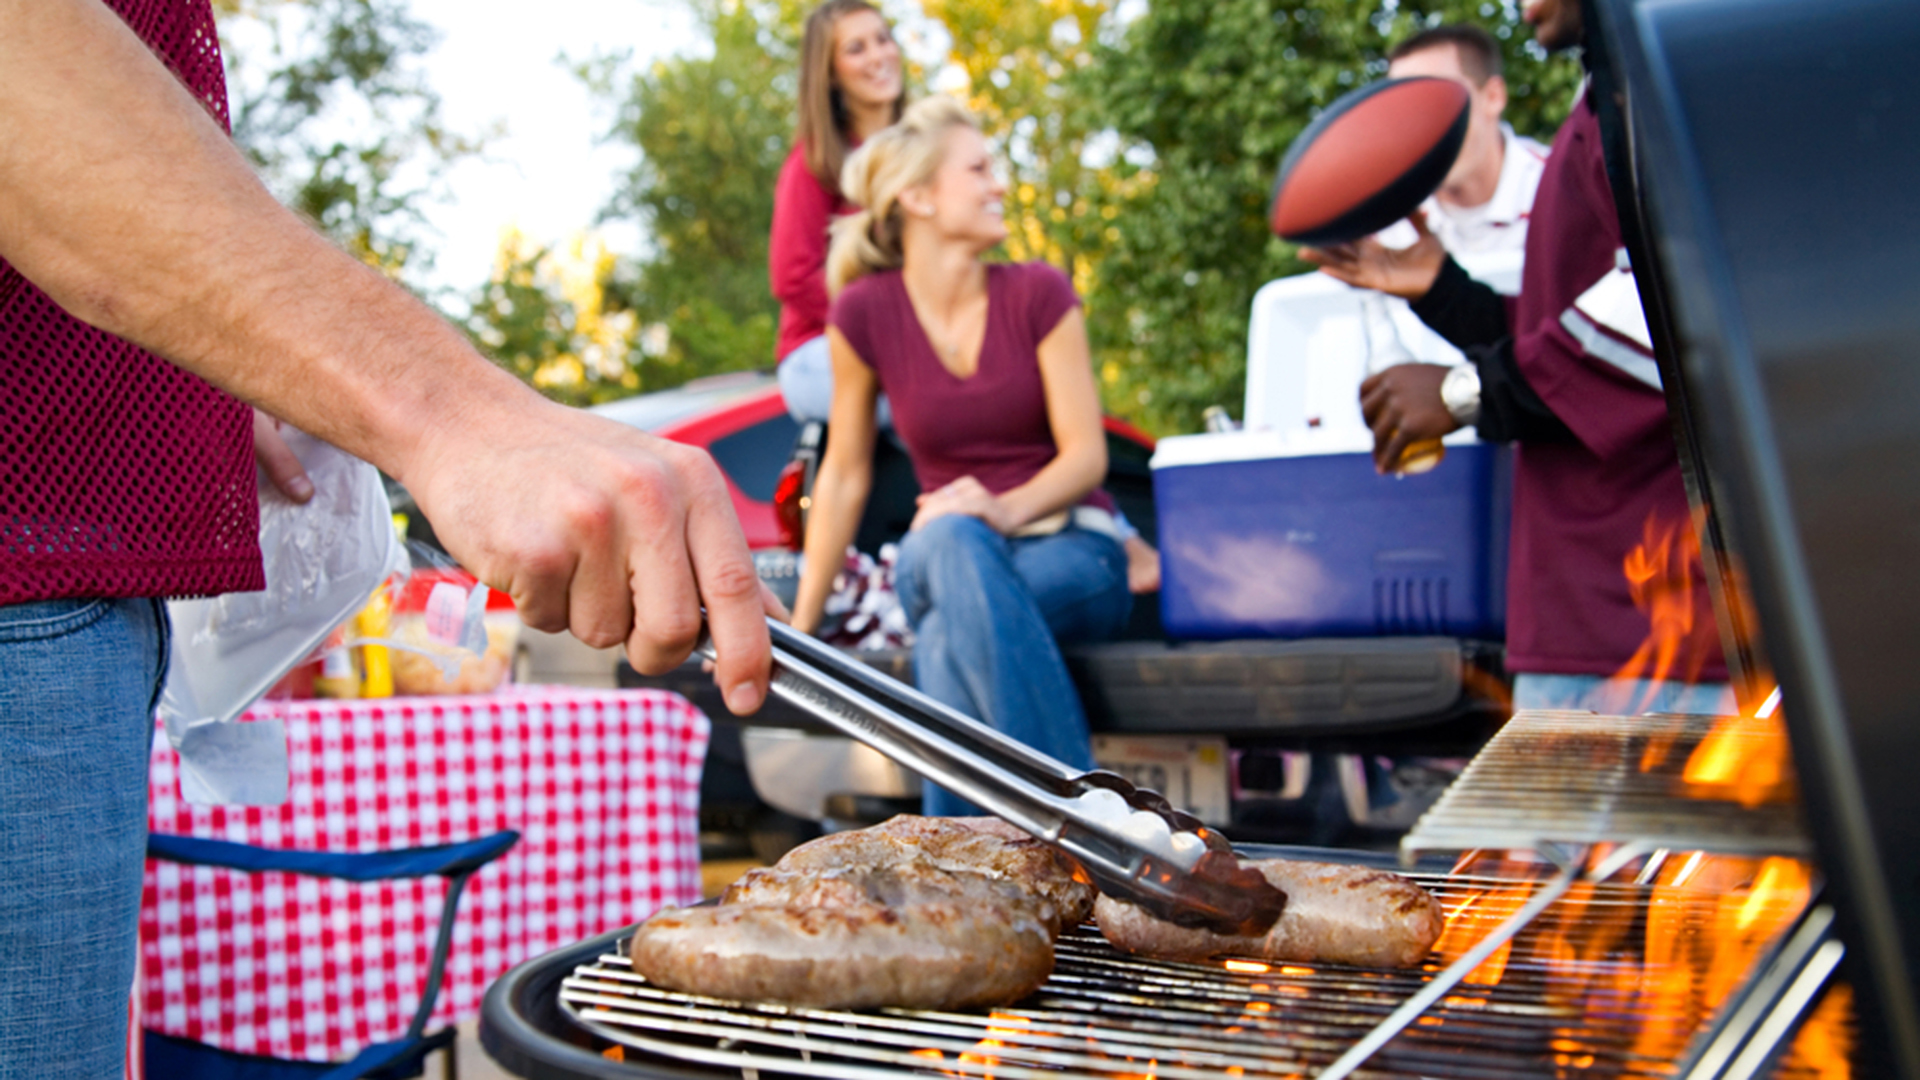 How to Keep Food Warm While Tailgating